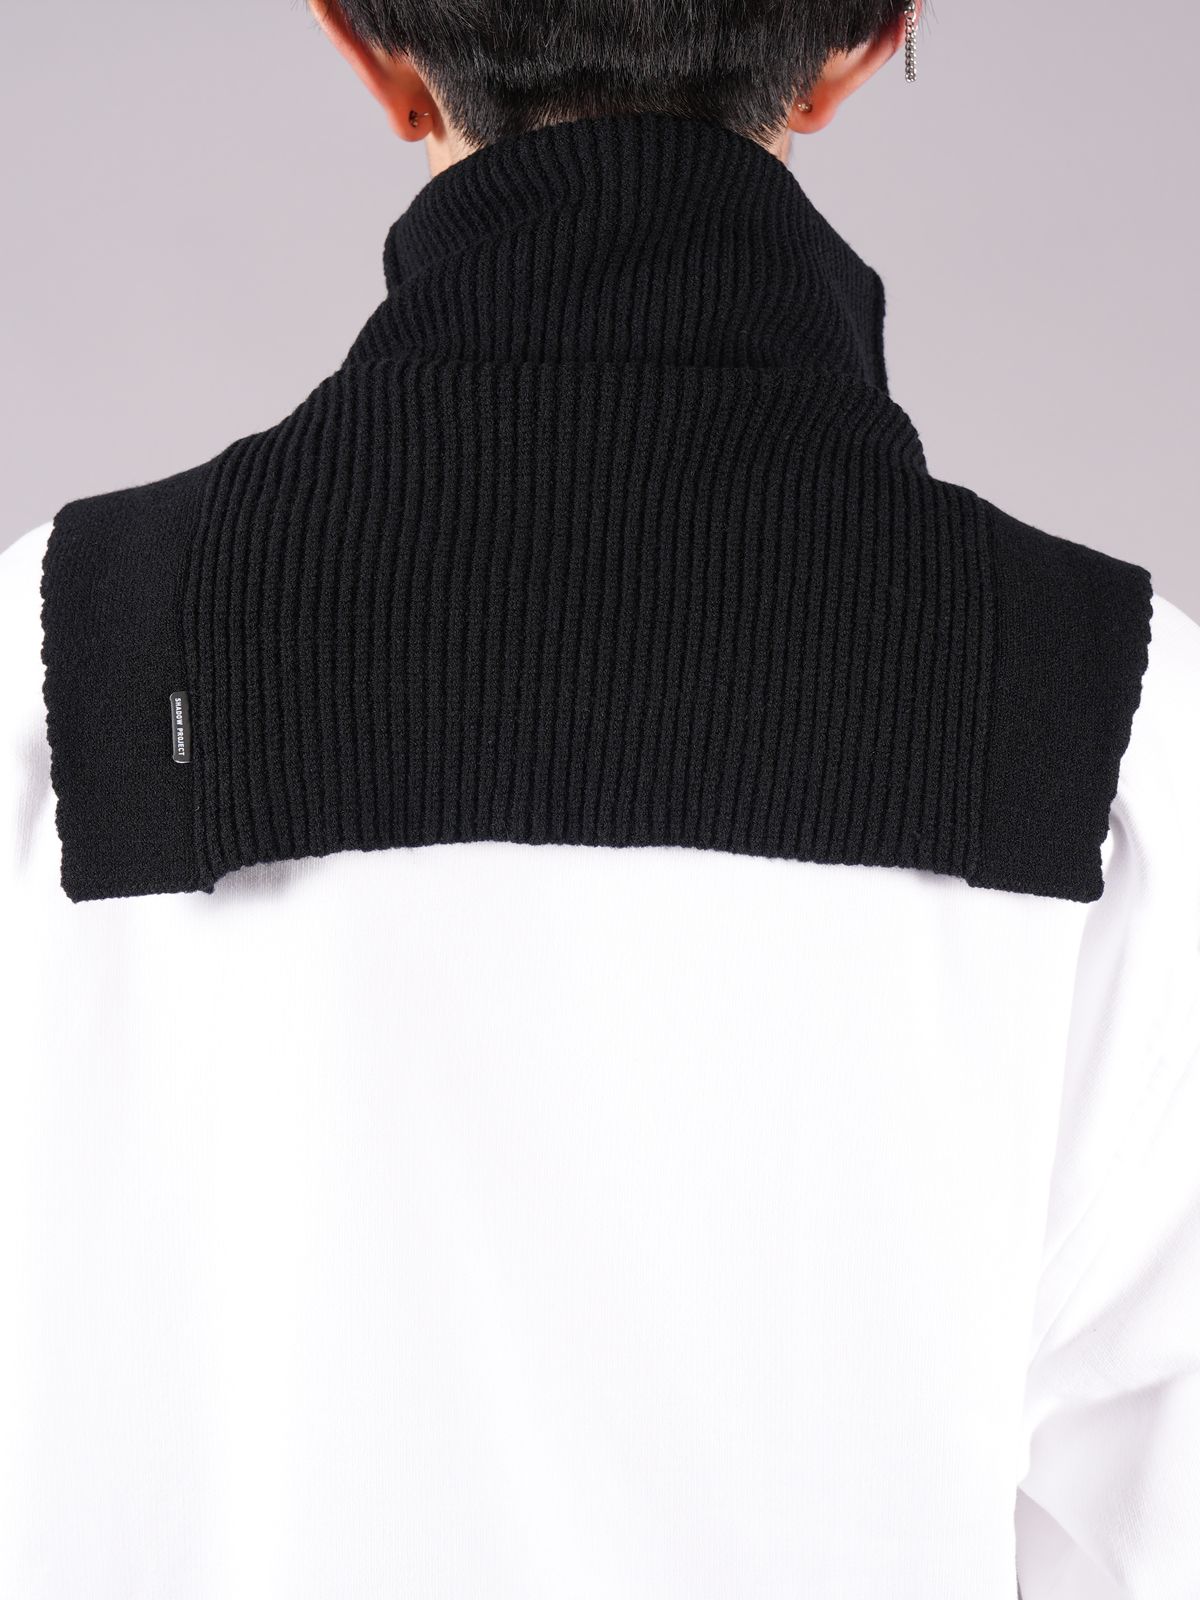 STONE ISLAND SHADOW PROJECT - N012V NECK/FRONT WARMER_CHAPTER 2 ...